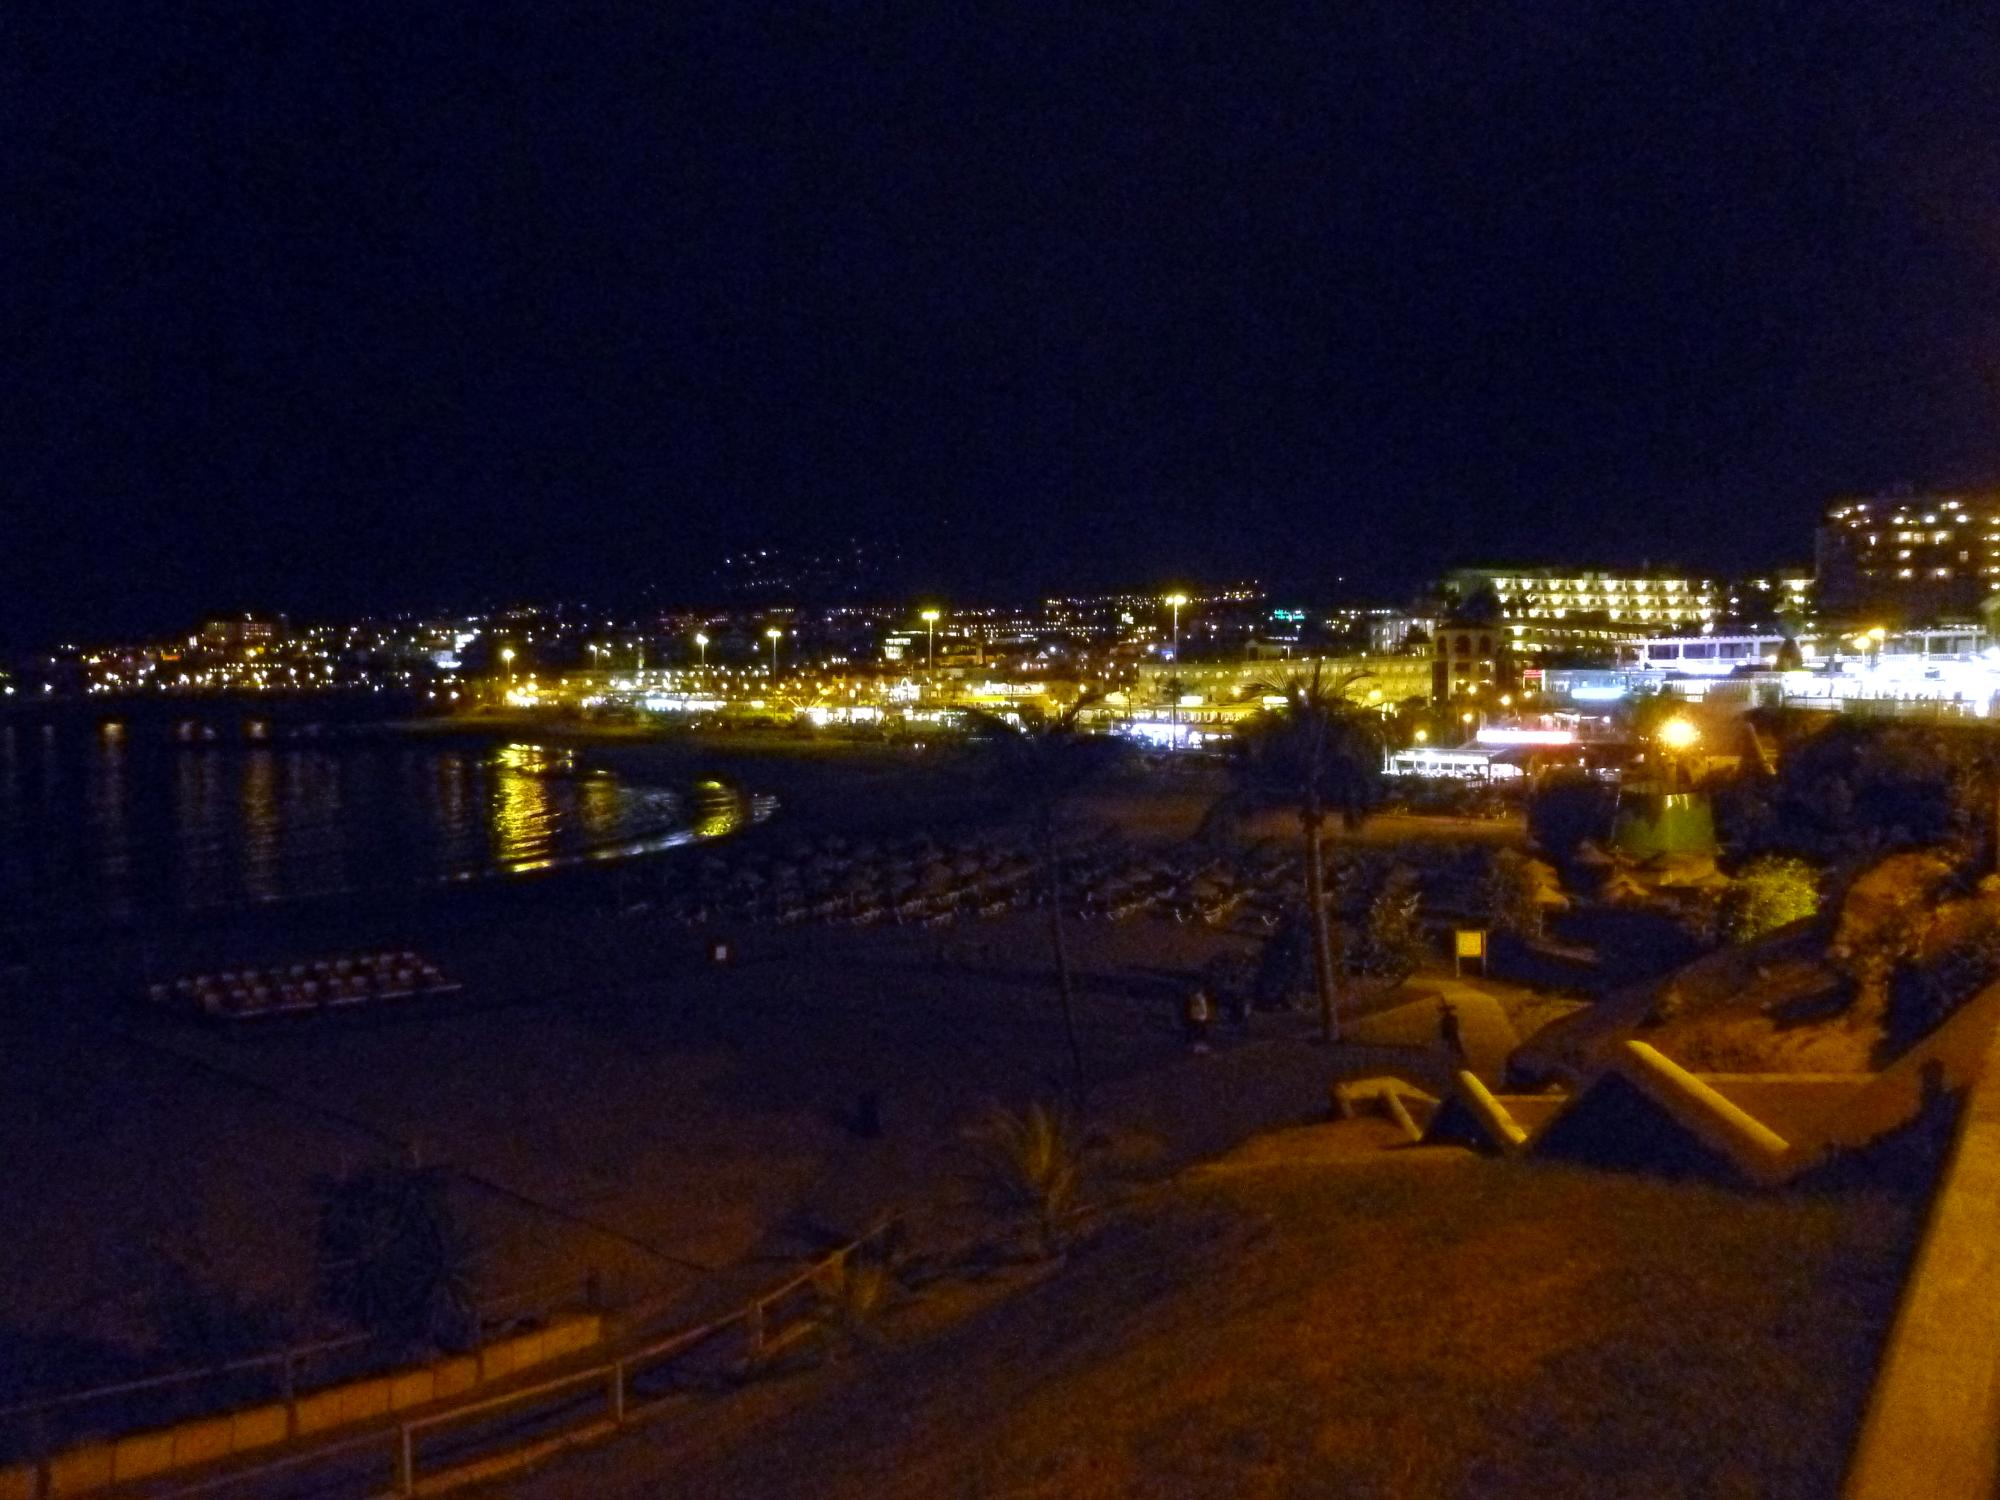  Canary Islands - Night Room View